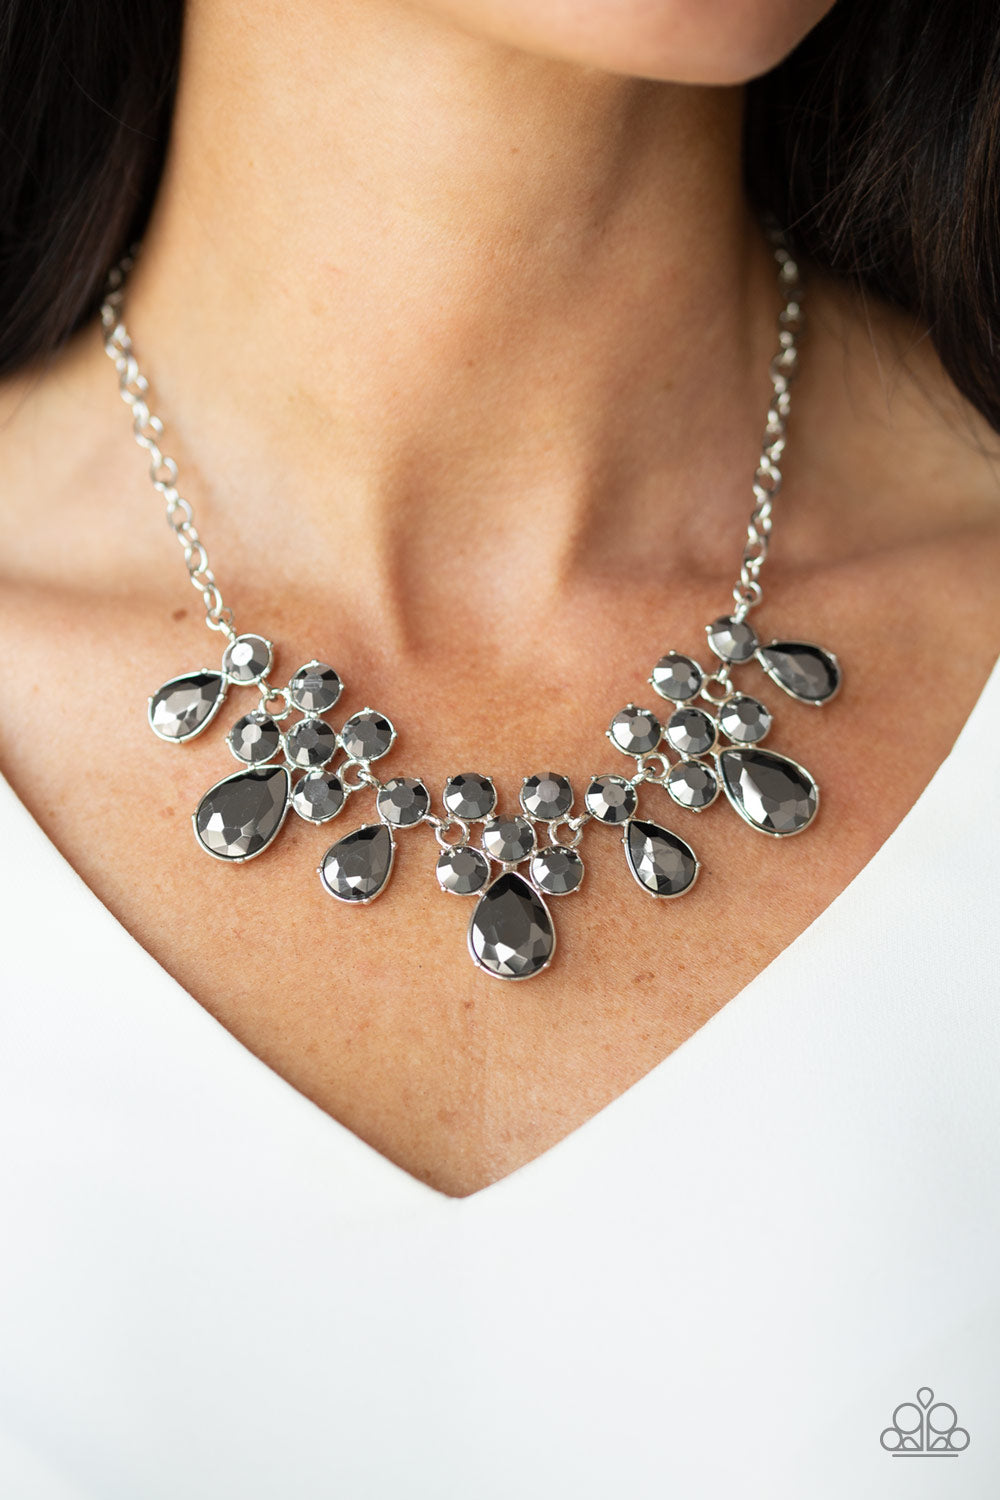 Debutante Drama Silver Necklace - Paparazzi Accessories  A collection of round and teardrop hematite rhinestones coalesce into dazzling frames as they link below the collar, creating a glamorous fringe. Features an adjustable clasp closure. All Paparazzi Accessories are lead free and nickel free!  Sold as one individual necklace. Includes one pair of matching earrings.